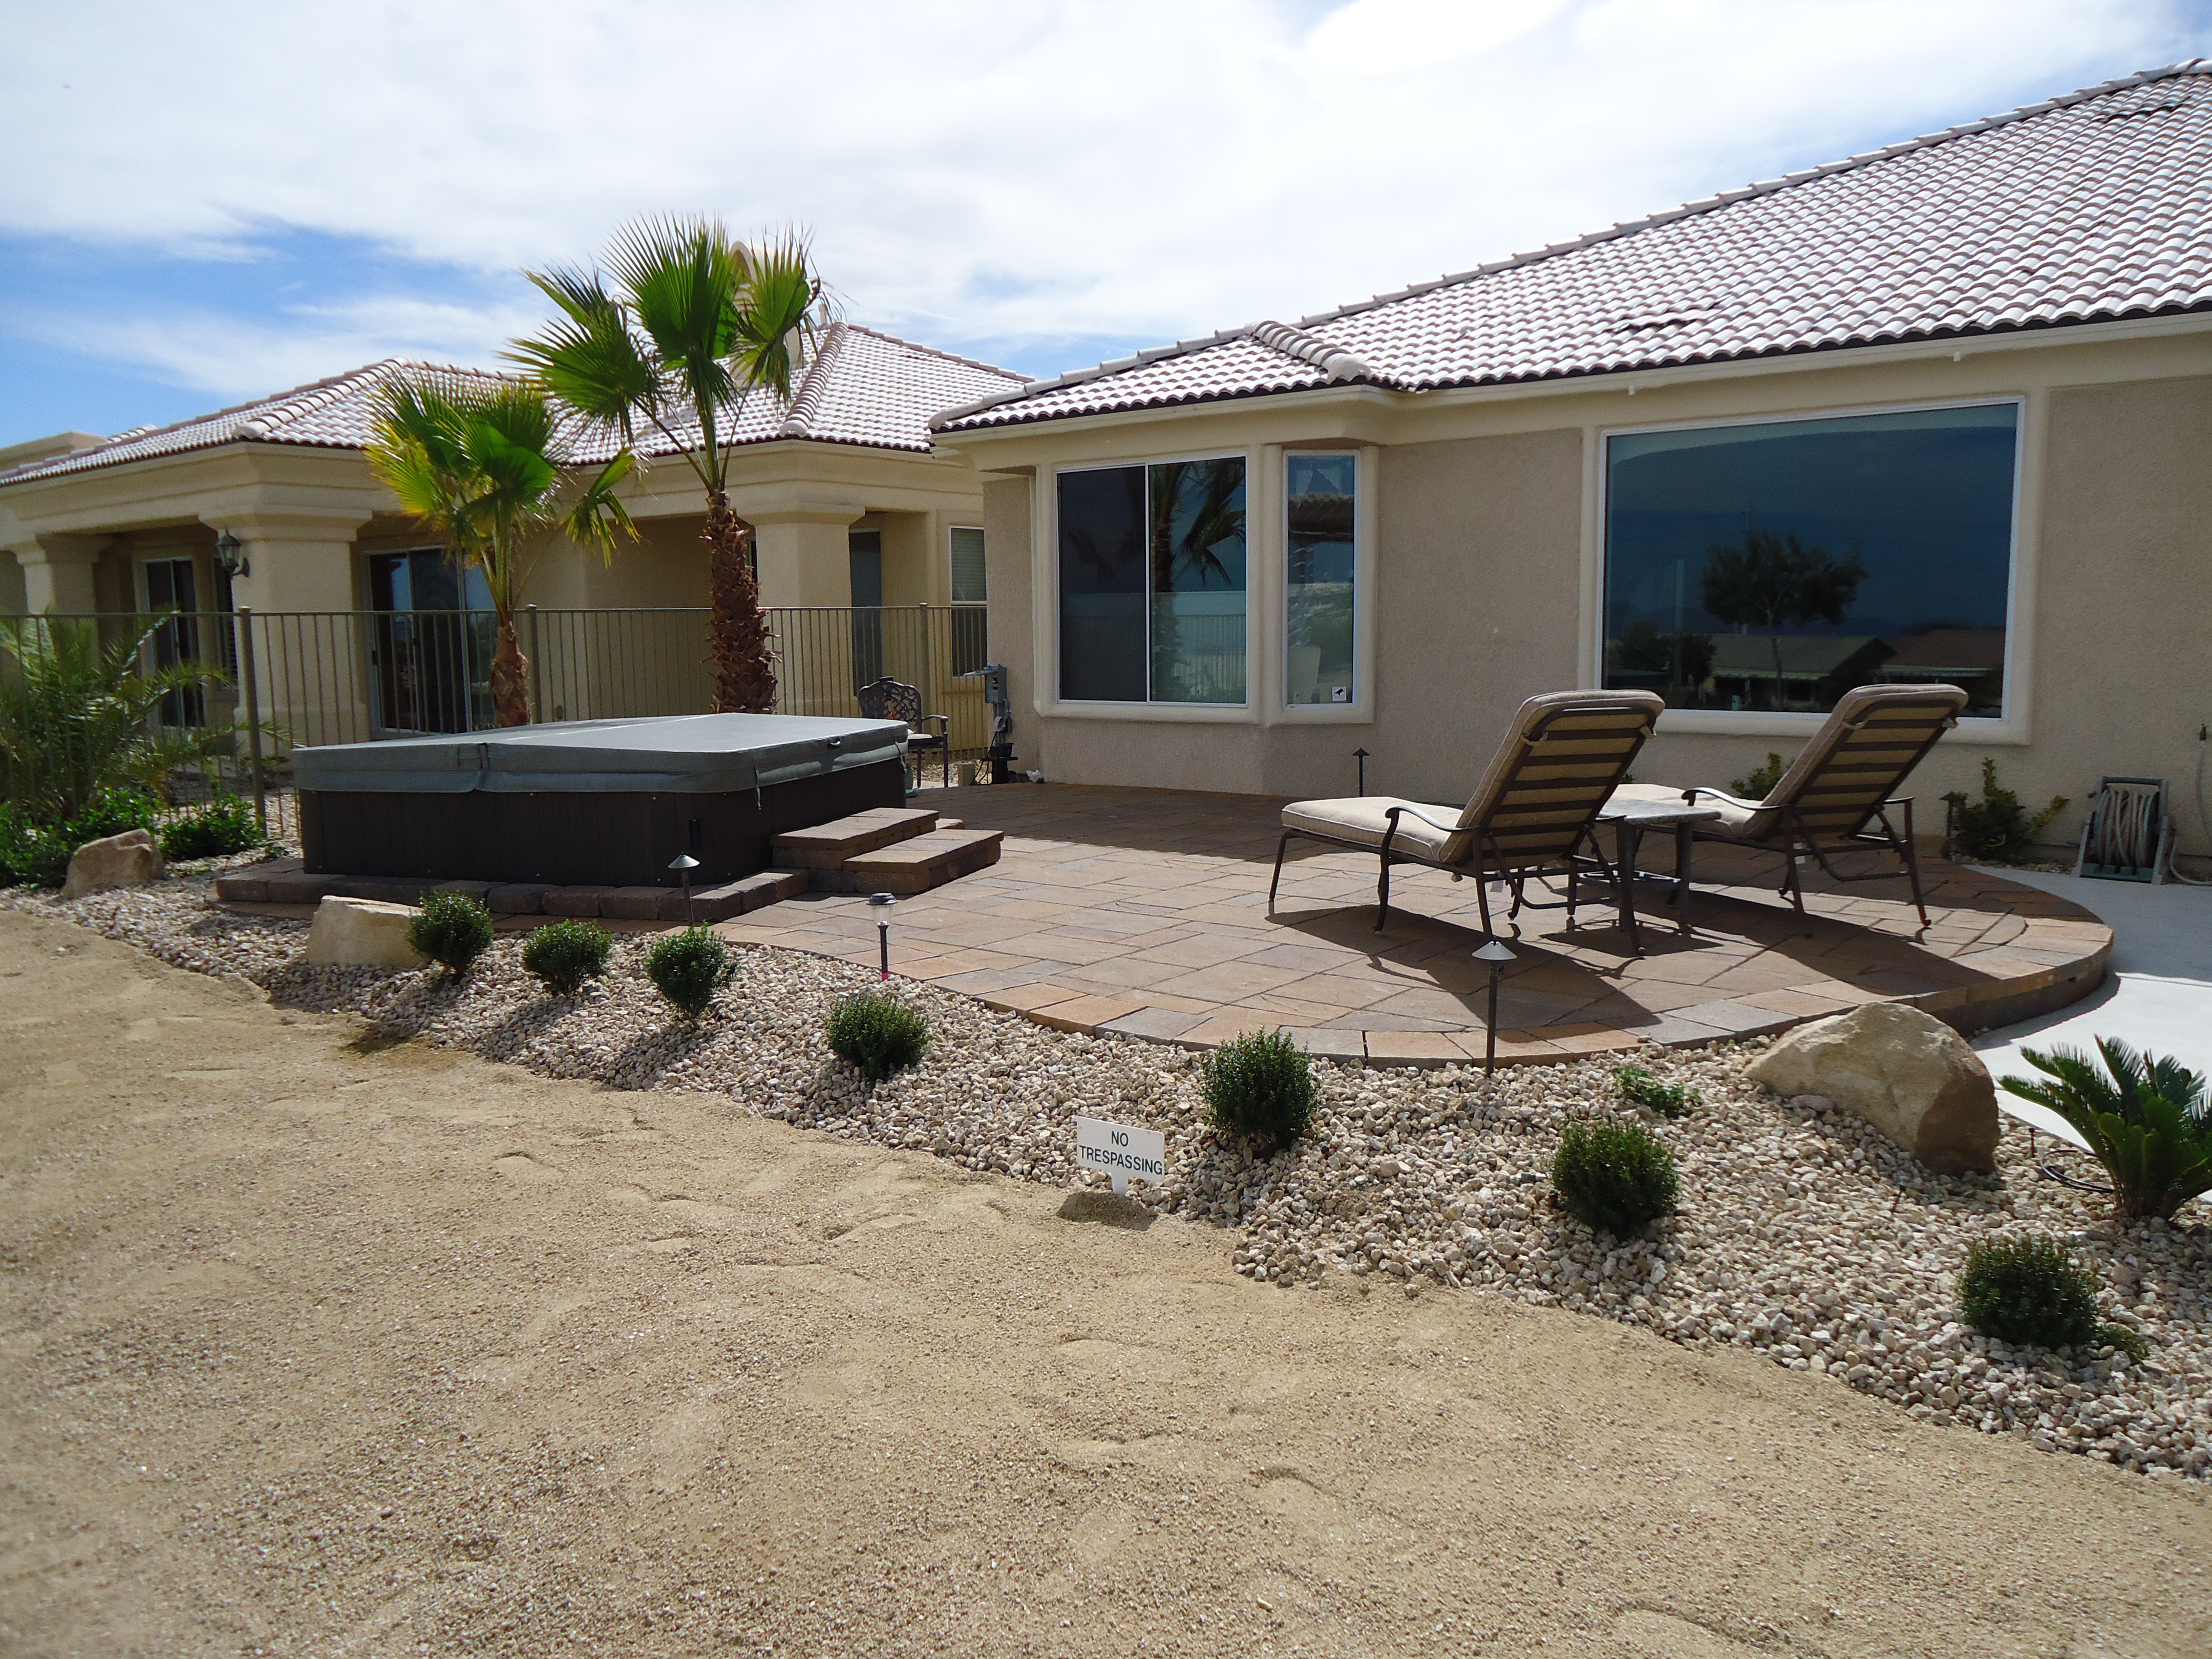 A comfortable Nevada yard, with a spa hot tub and paver patio.